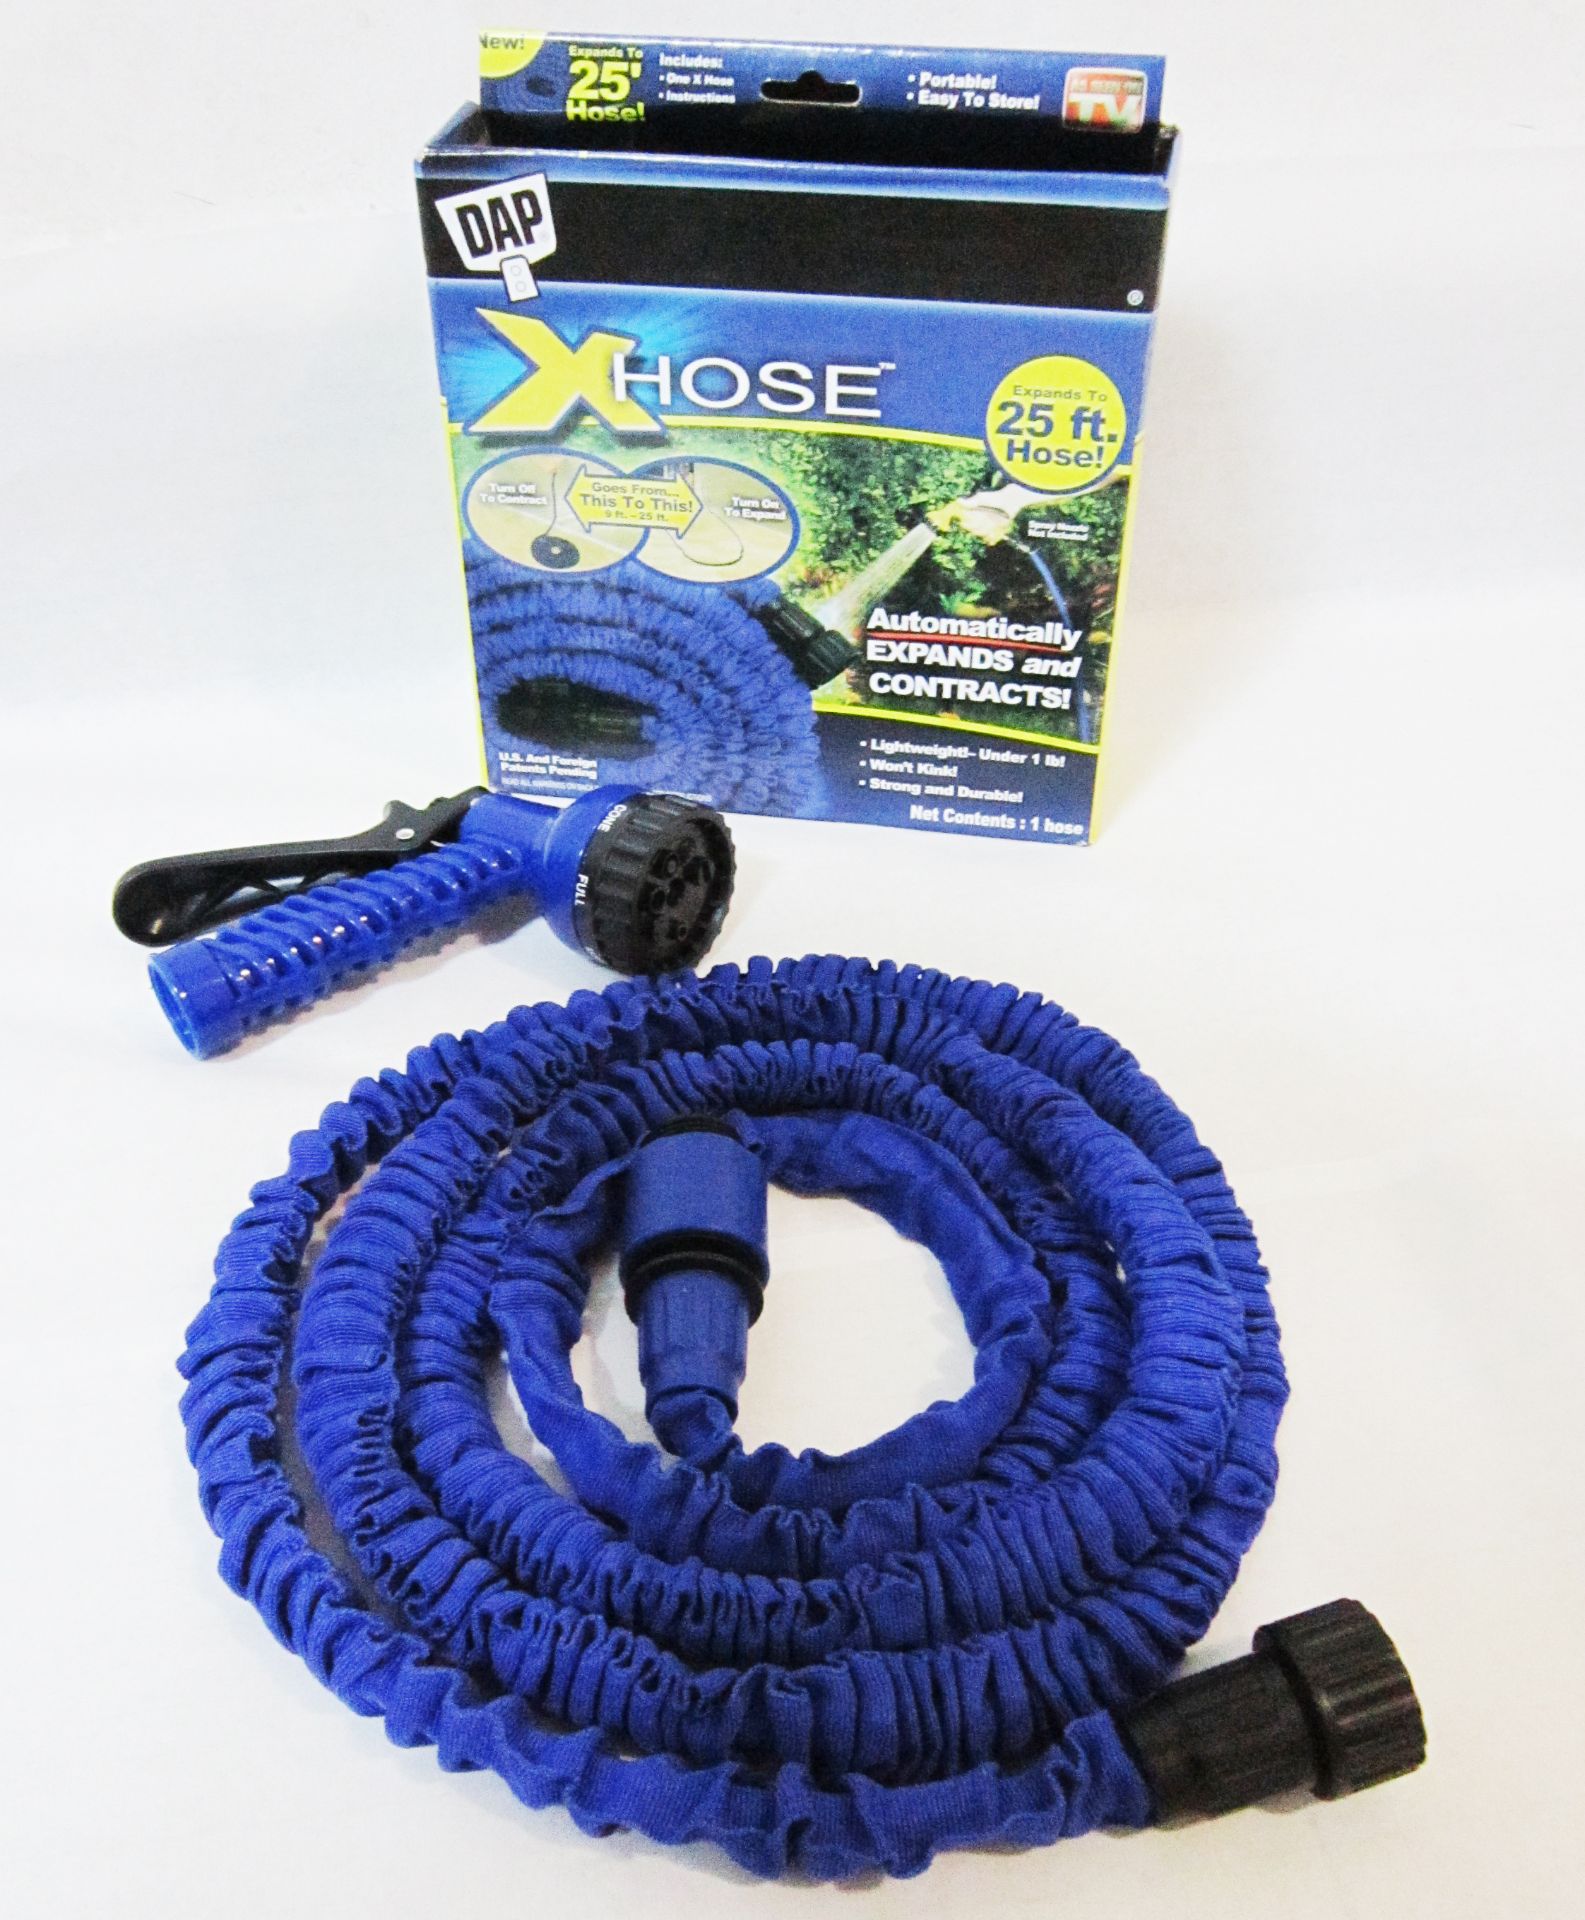 ONE BOXED BRAND NEW STANDARD FLEXIBLE AND EXPANDABLE GARDEN WATER PIPE 25FT TWT283 (TLH-100)